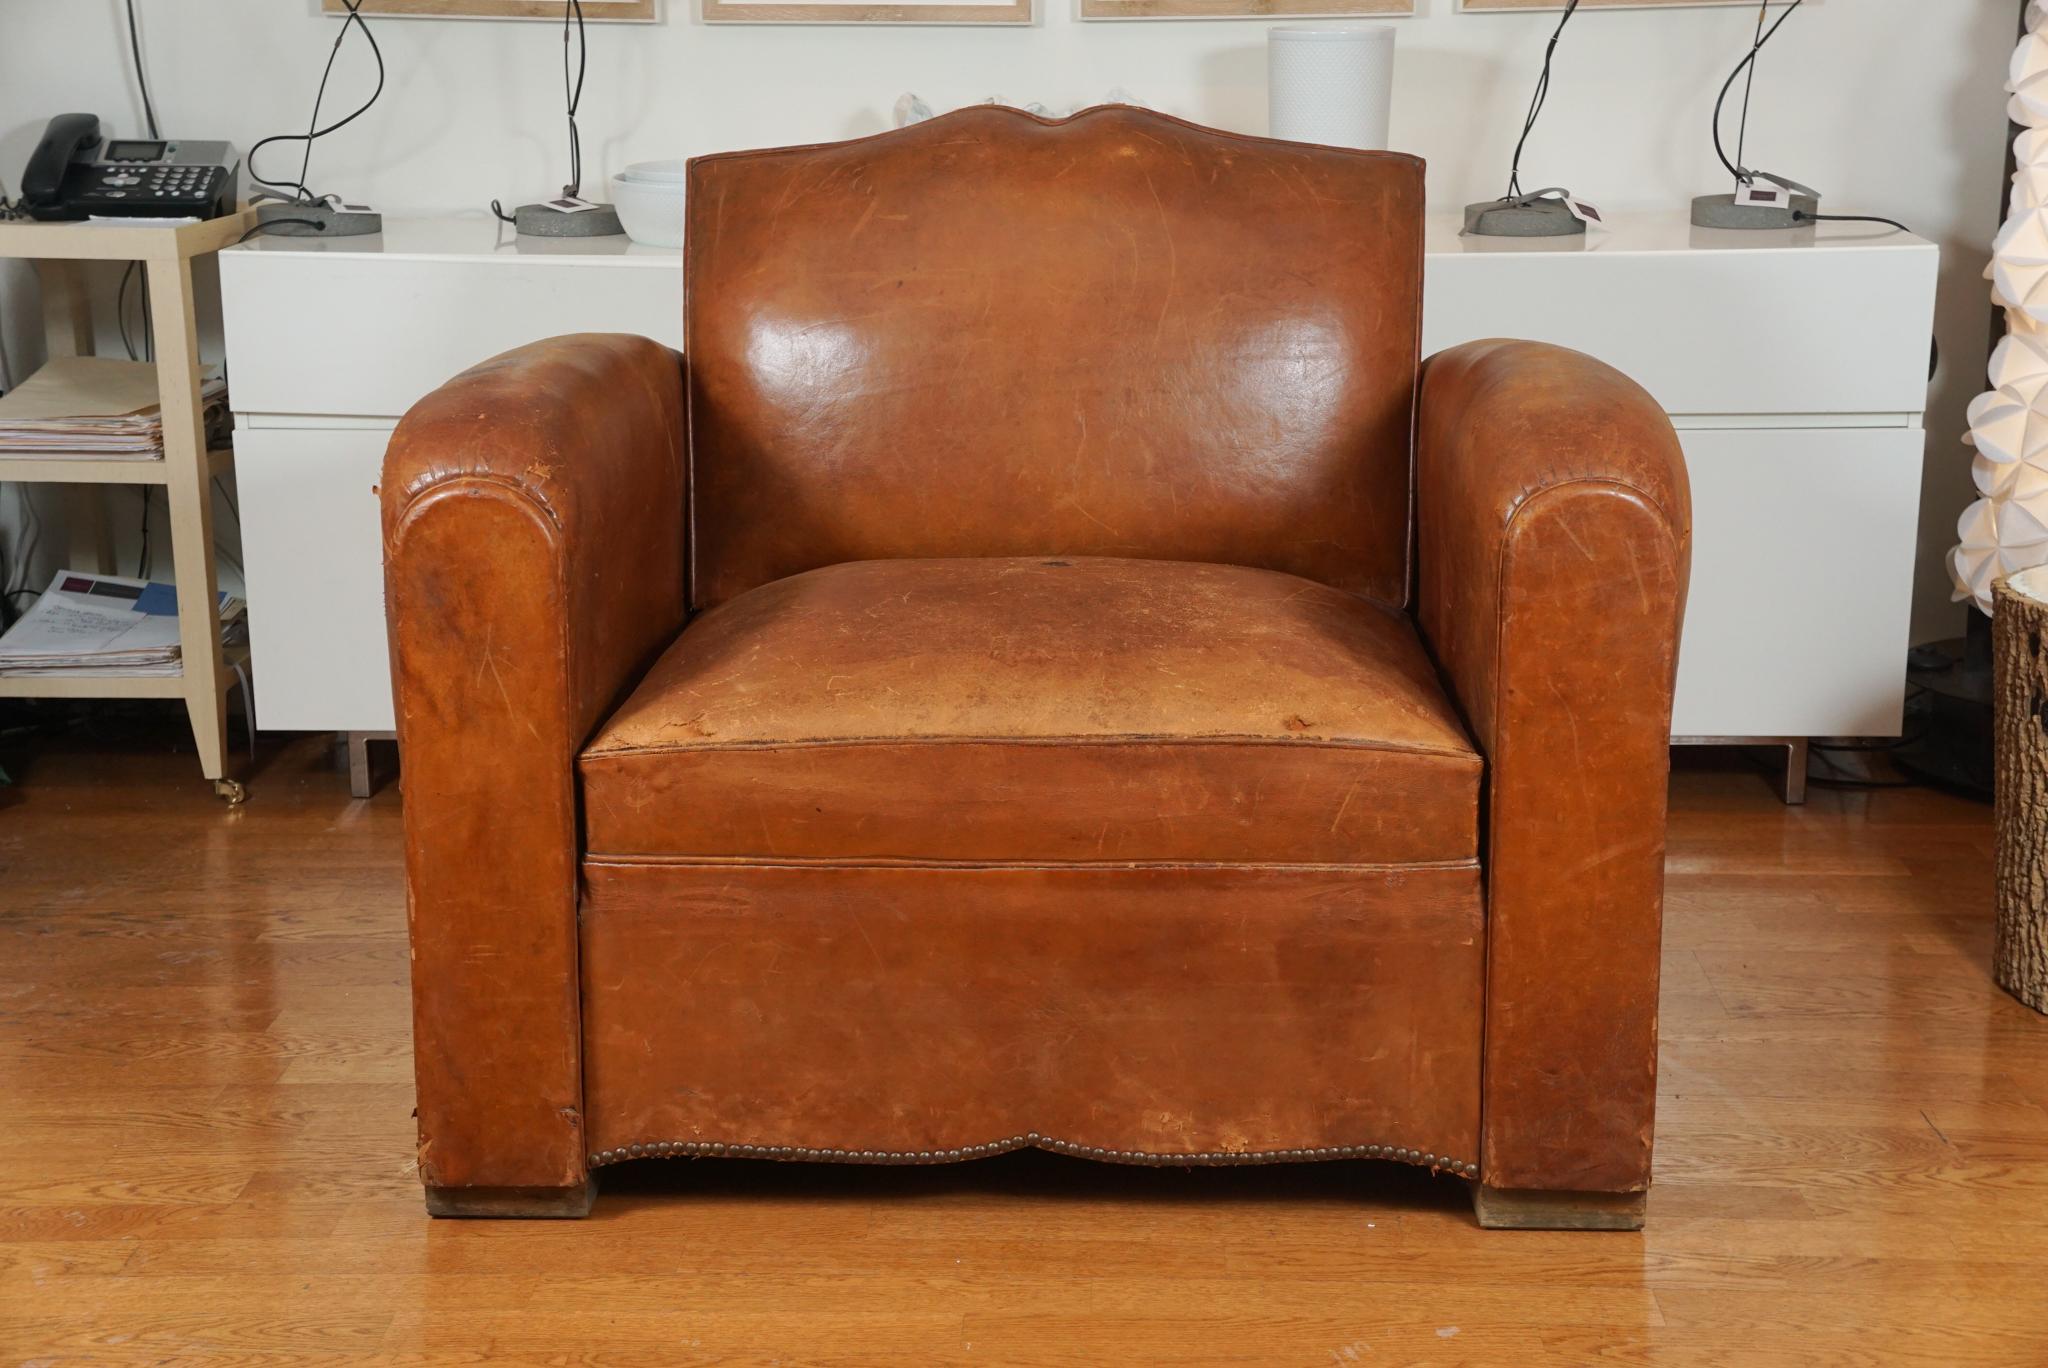 Spectacular, French leather club chair, with a mustache back, that is irresistibly worn, distressed, and completely reeks of the WOW factor! It doesn't stop there... this incredible gem, opens up to a twin size bed! Seriously!! Are you 